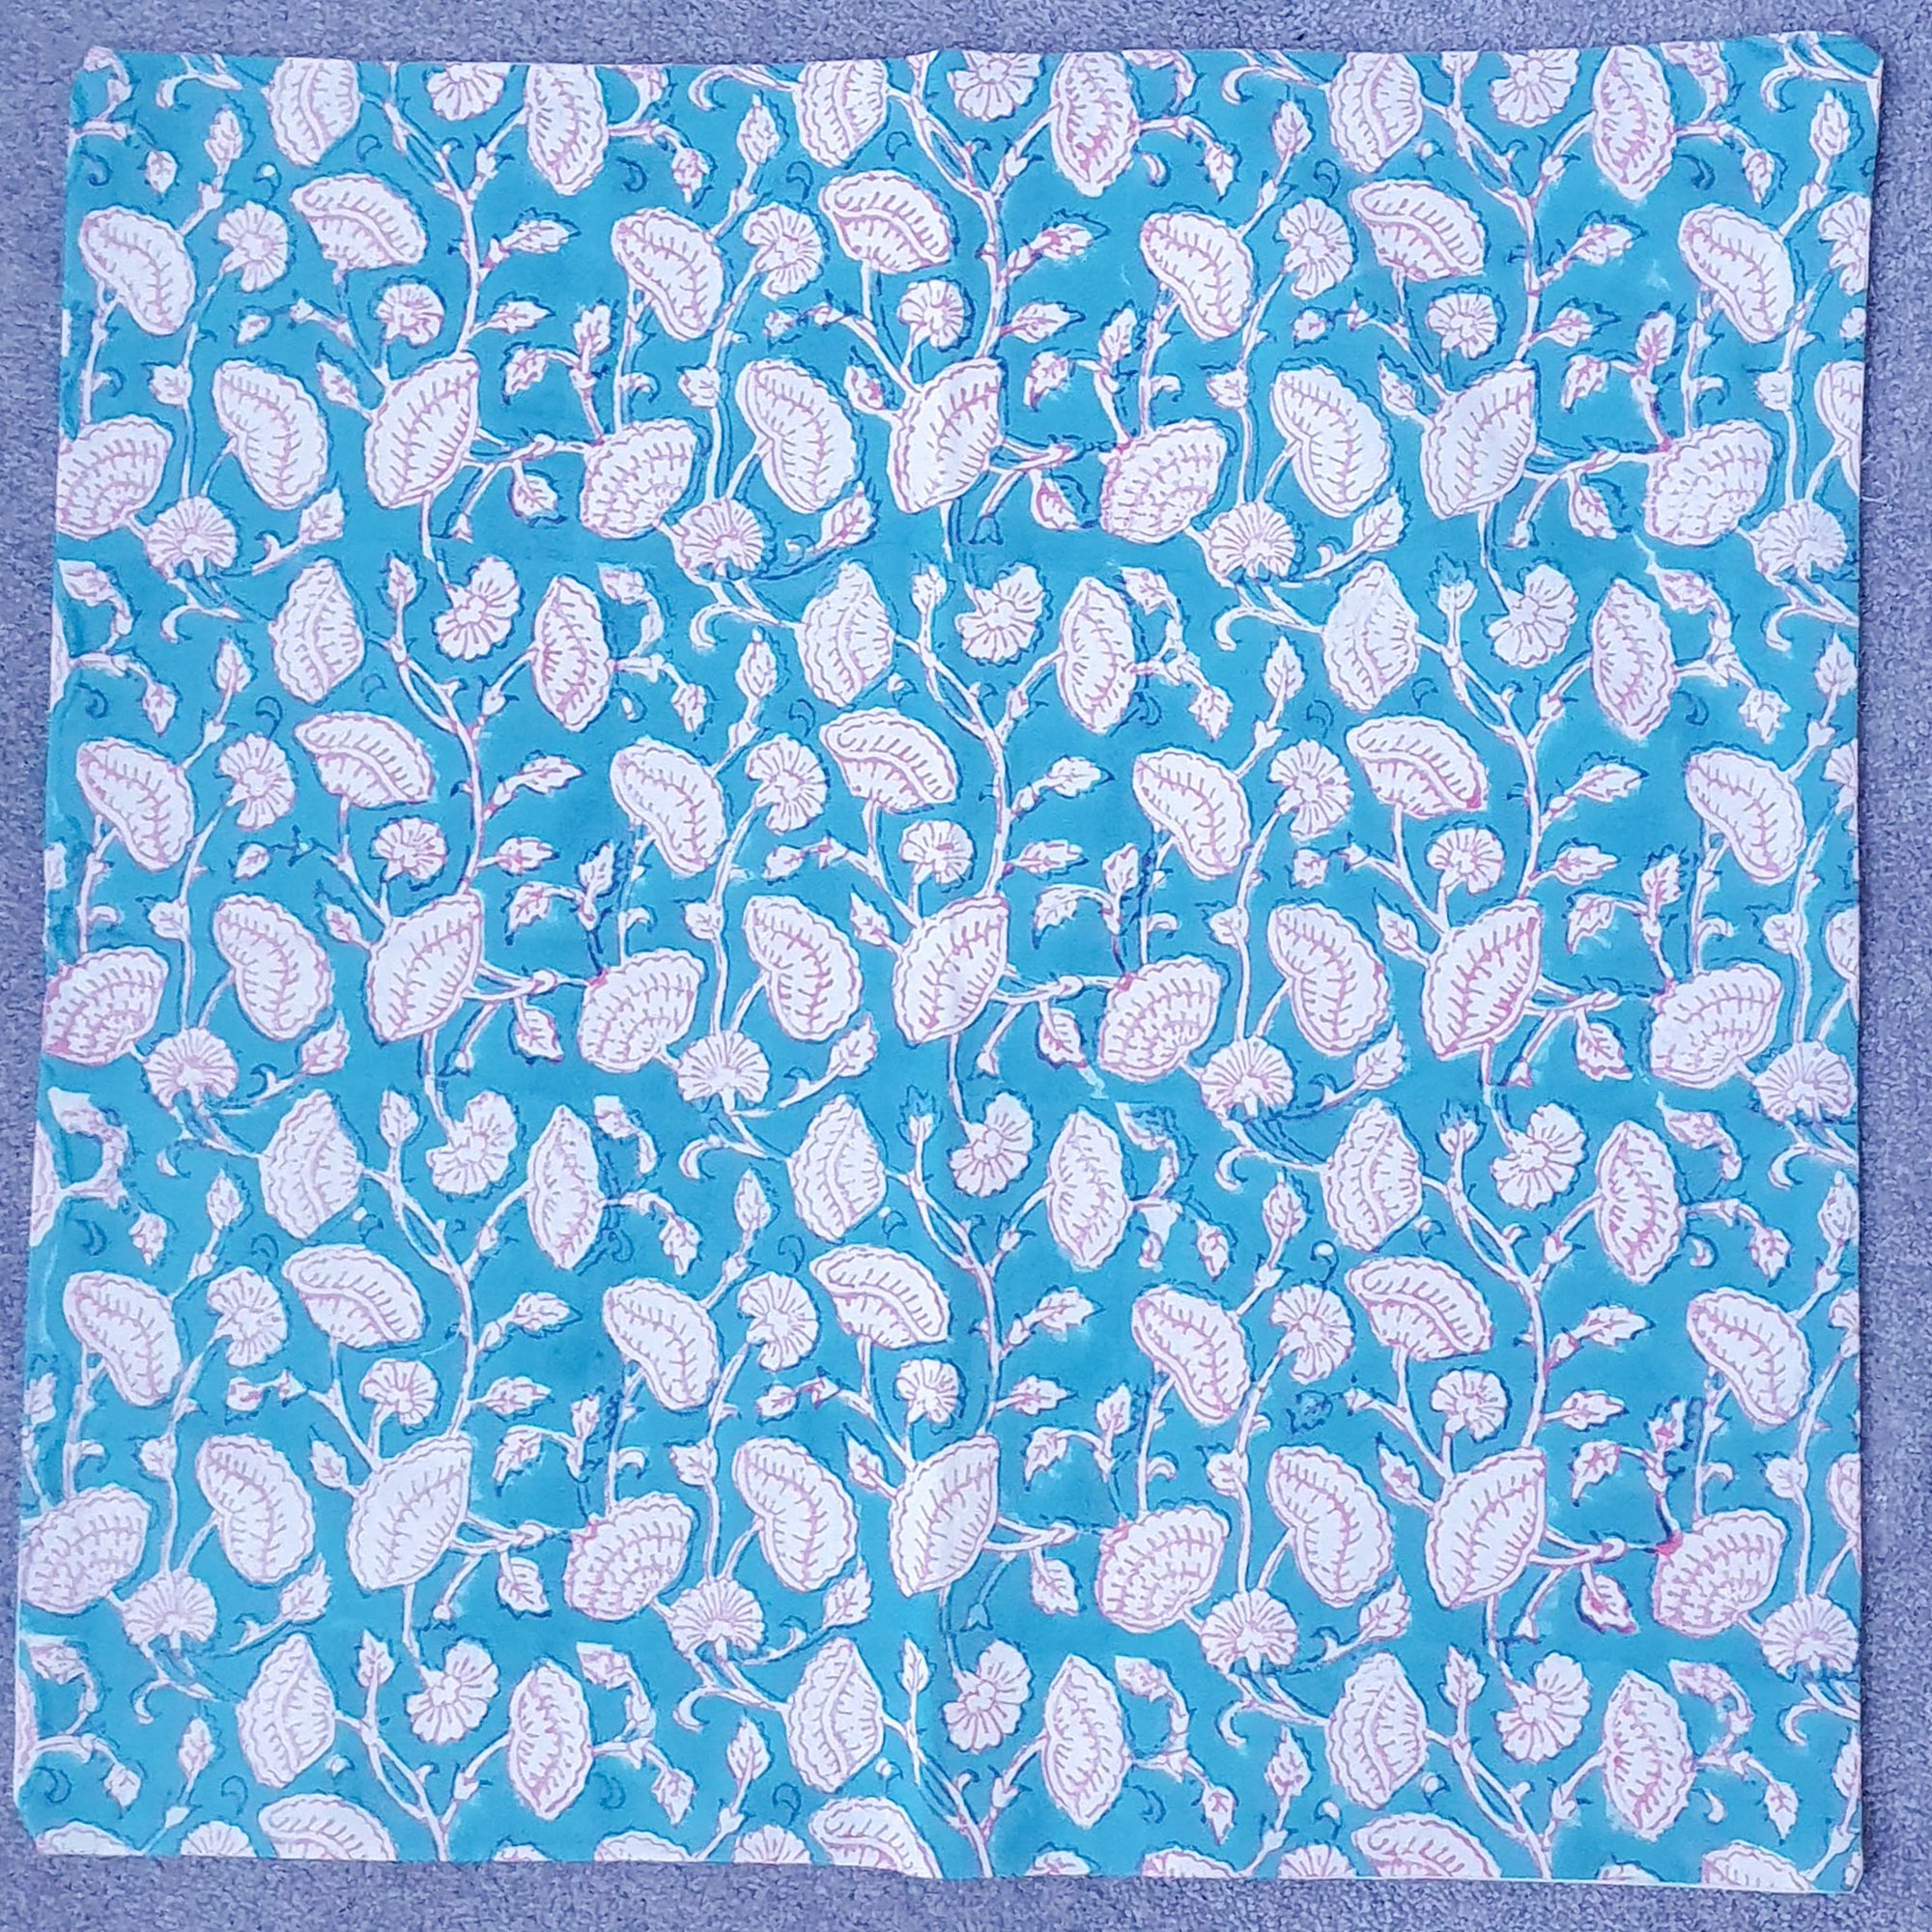 Block-printed Cushion Cover - Teal And Pink